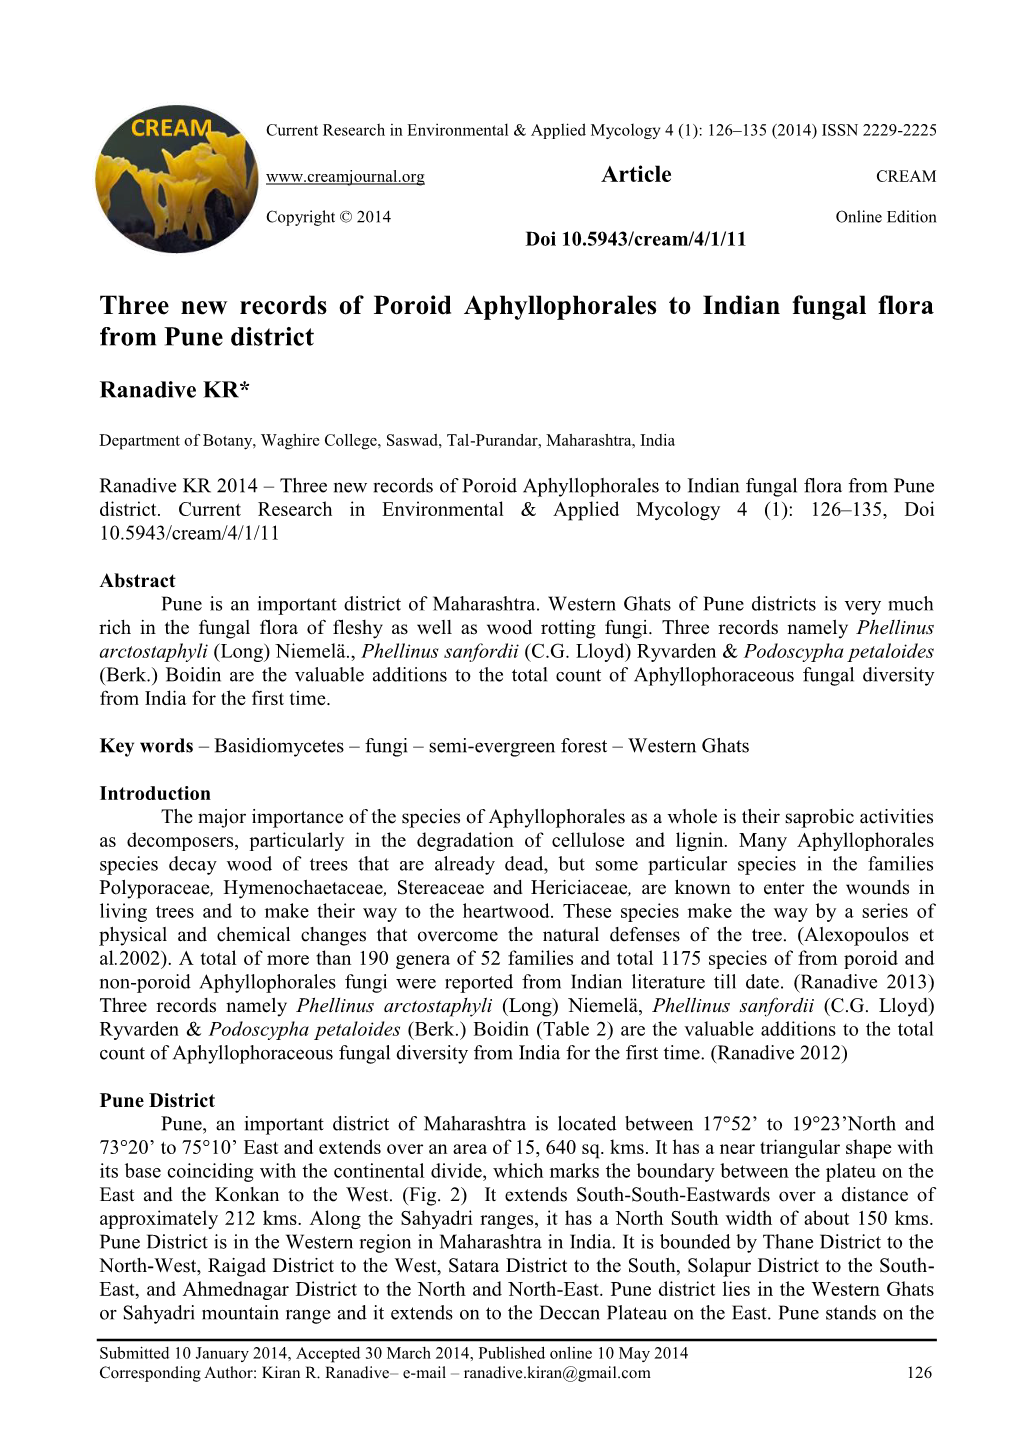 Three New Records of Poroid Aphyllophorales to Indian Fungal Flora from Pune District